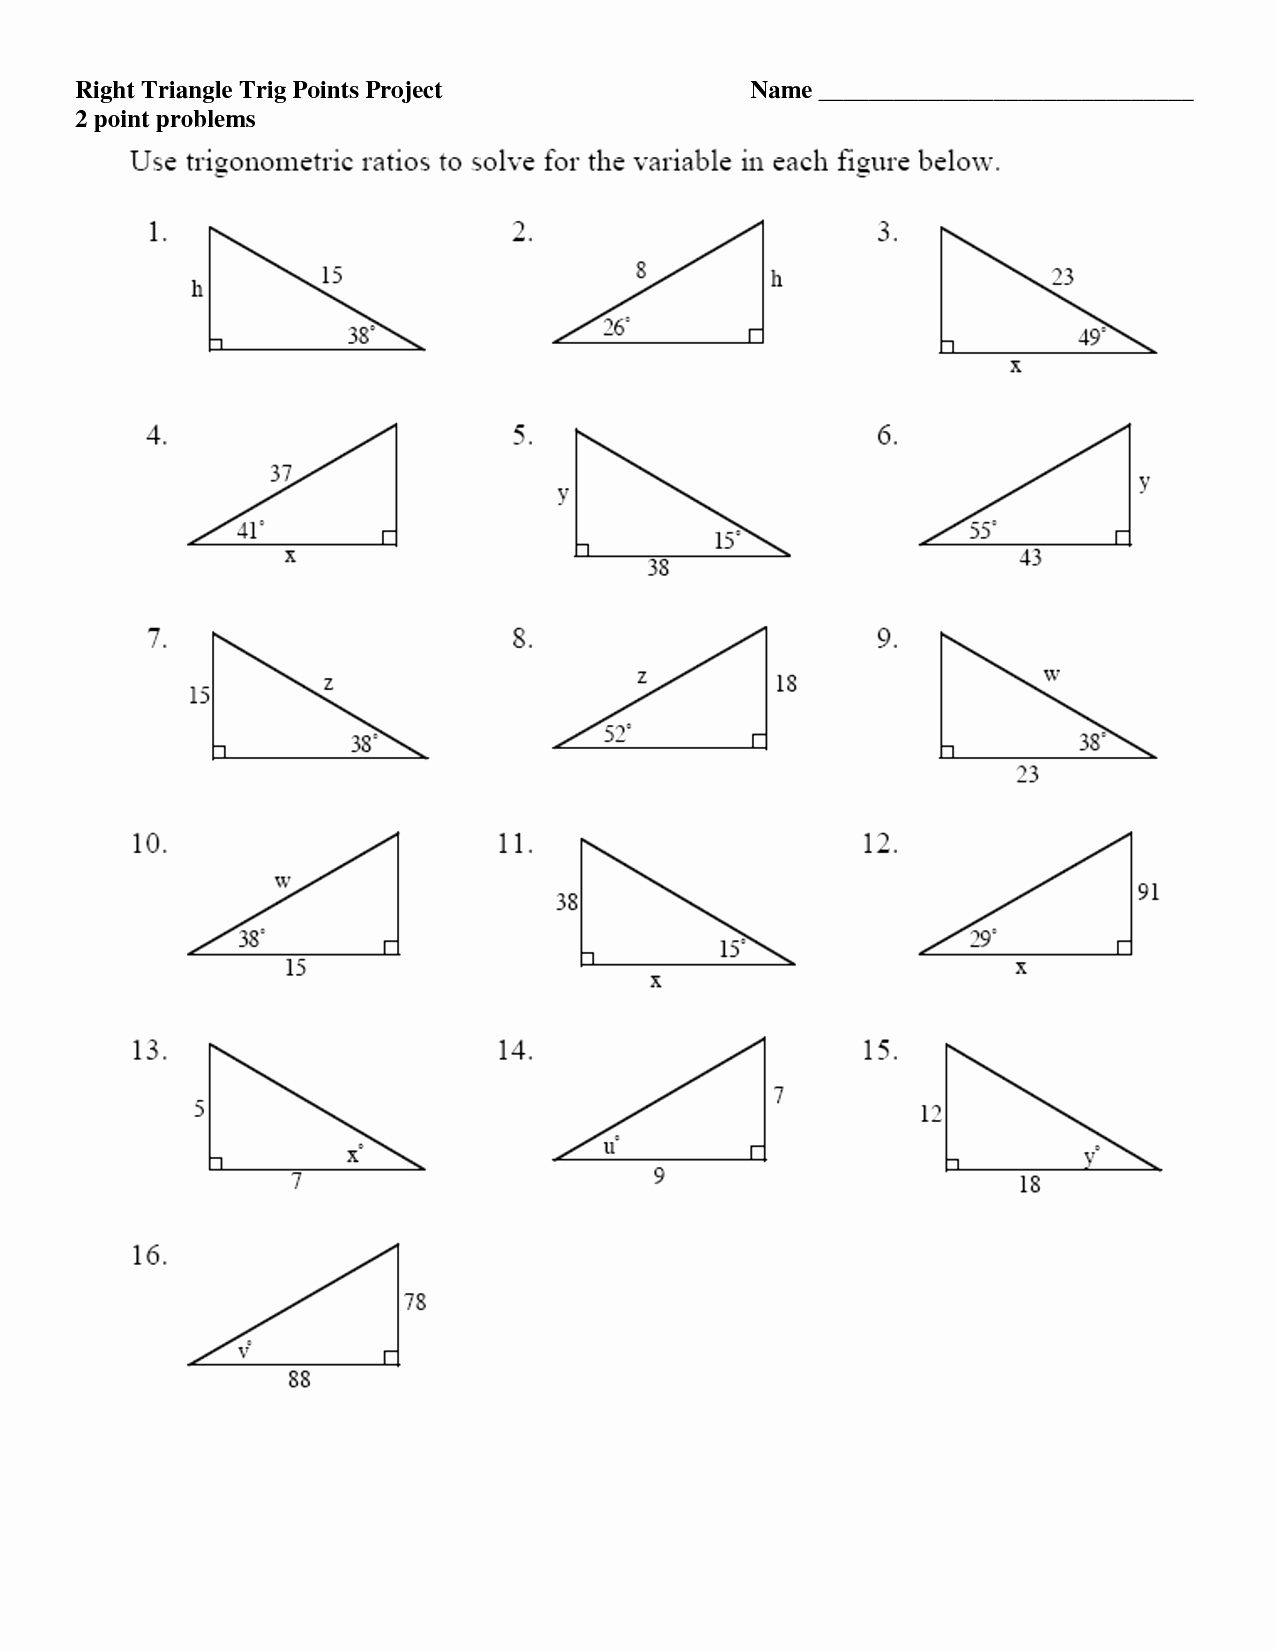 Right Triangle Trig Worksheet Unique Trigonometry Ratios In Right Triangles Worksheet the Best